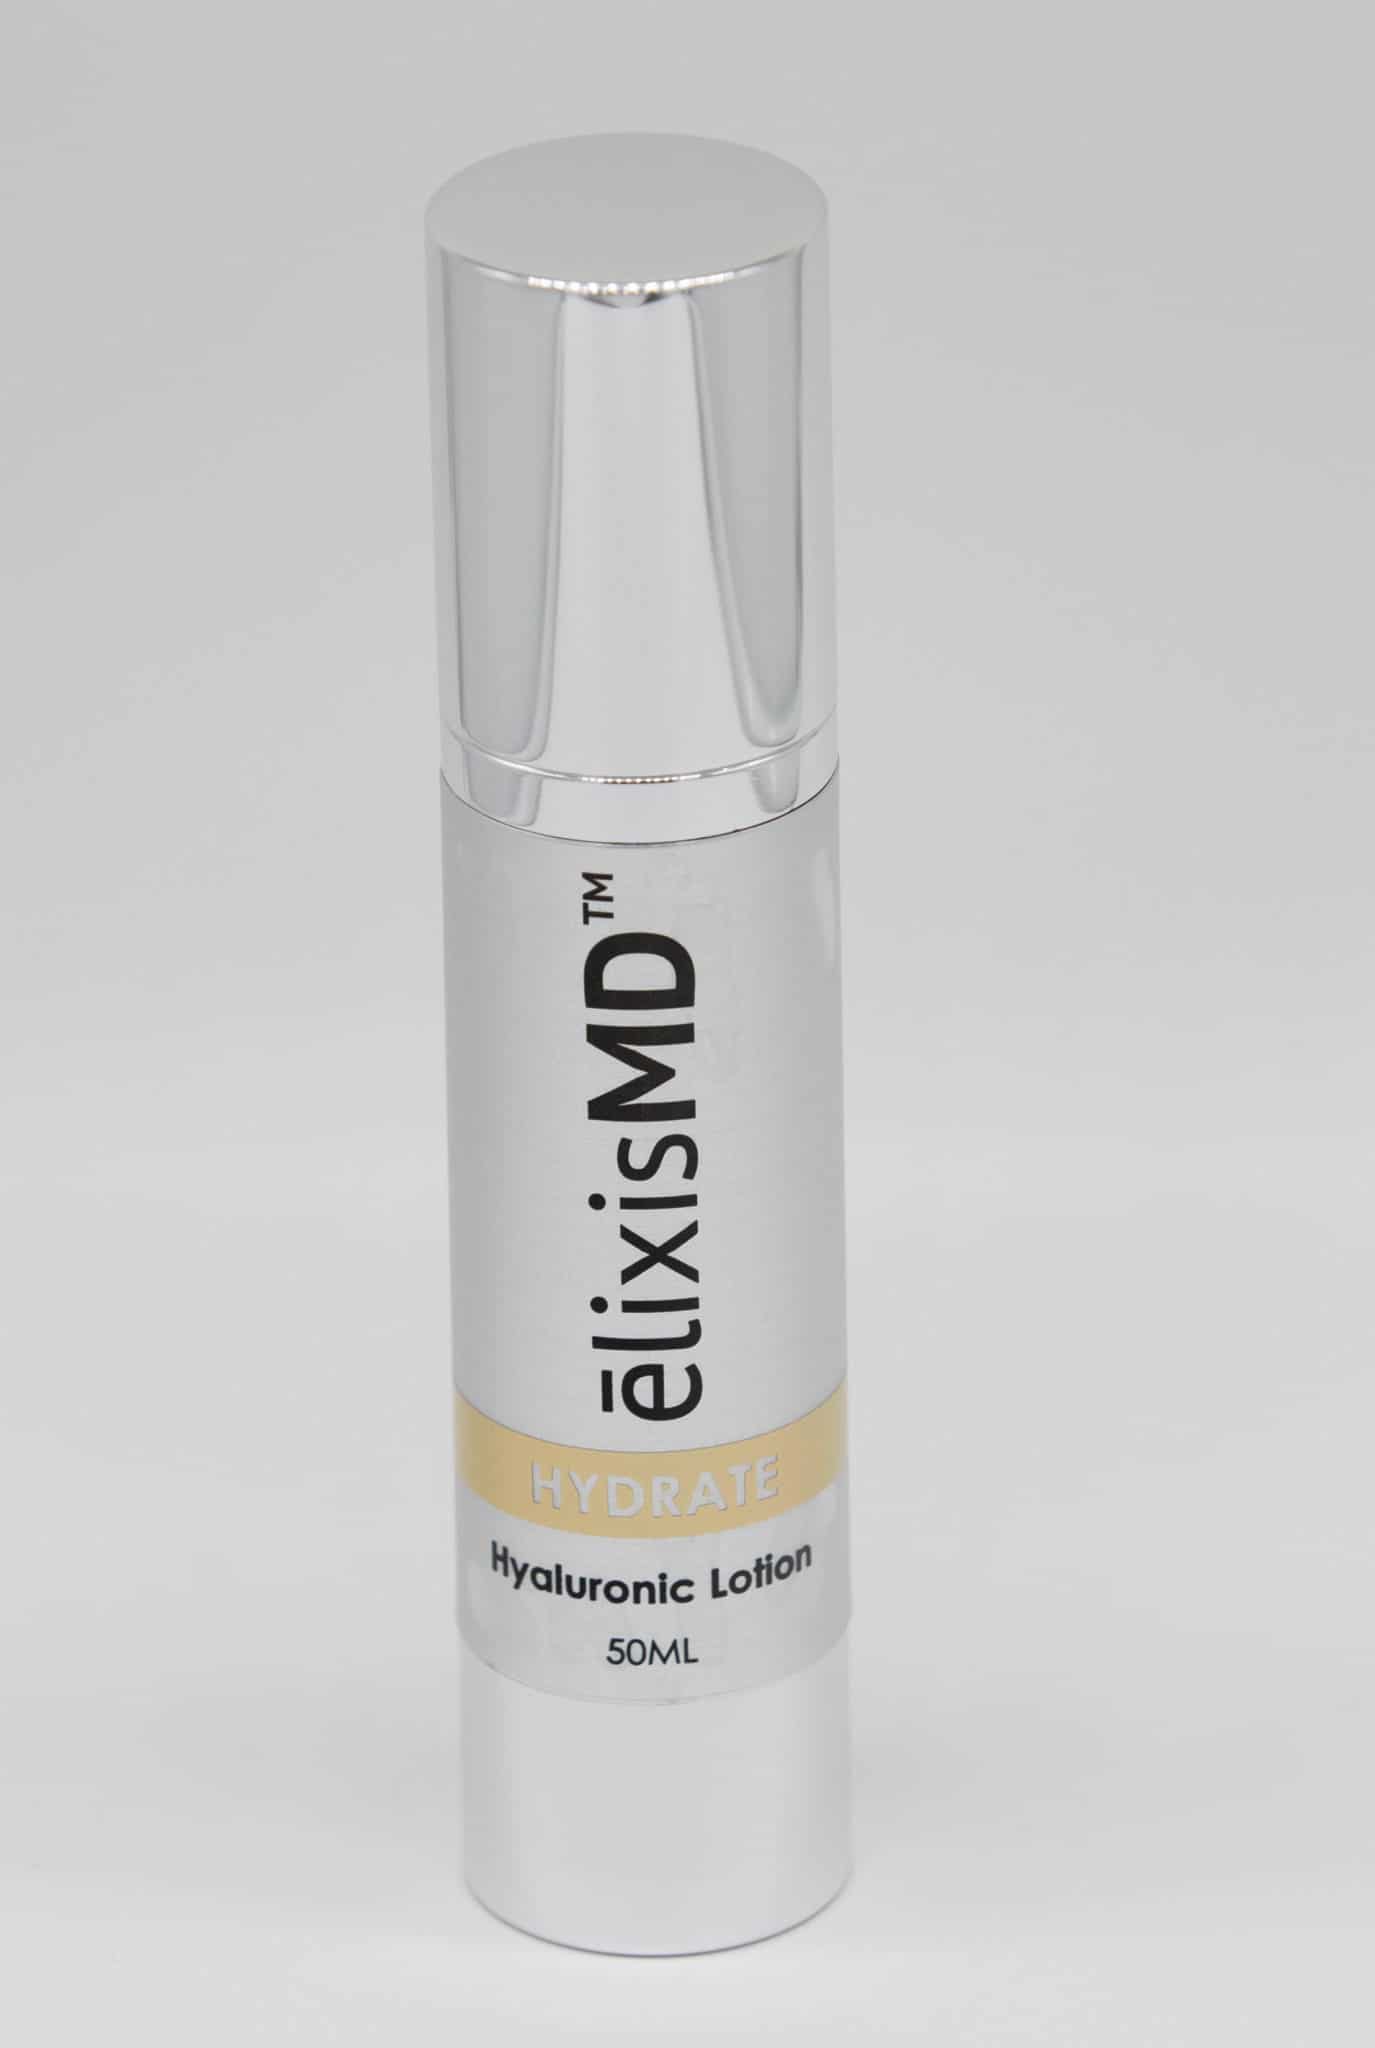 Hyaluronic Lotion